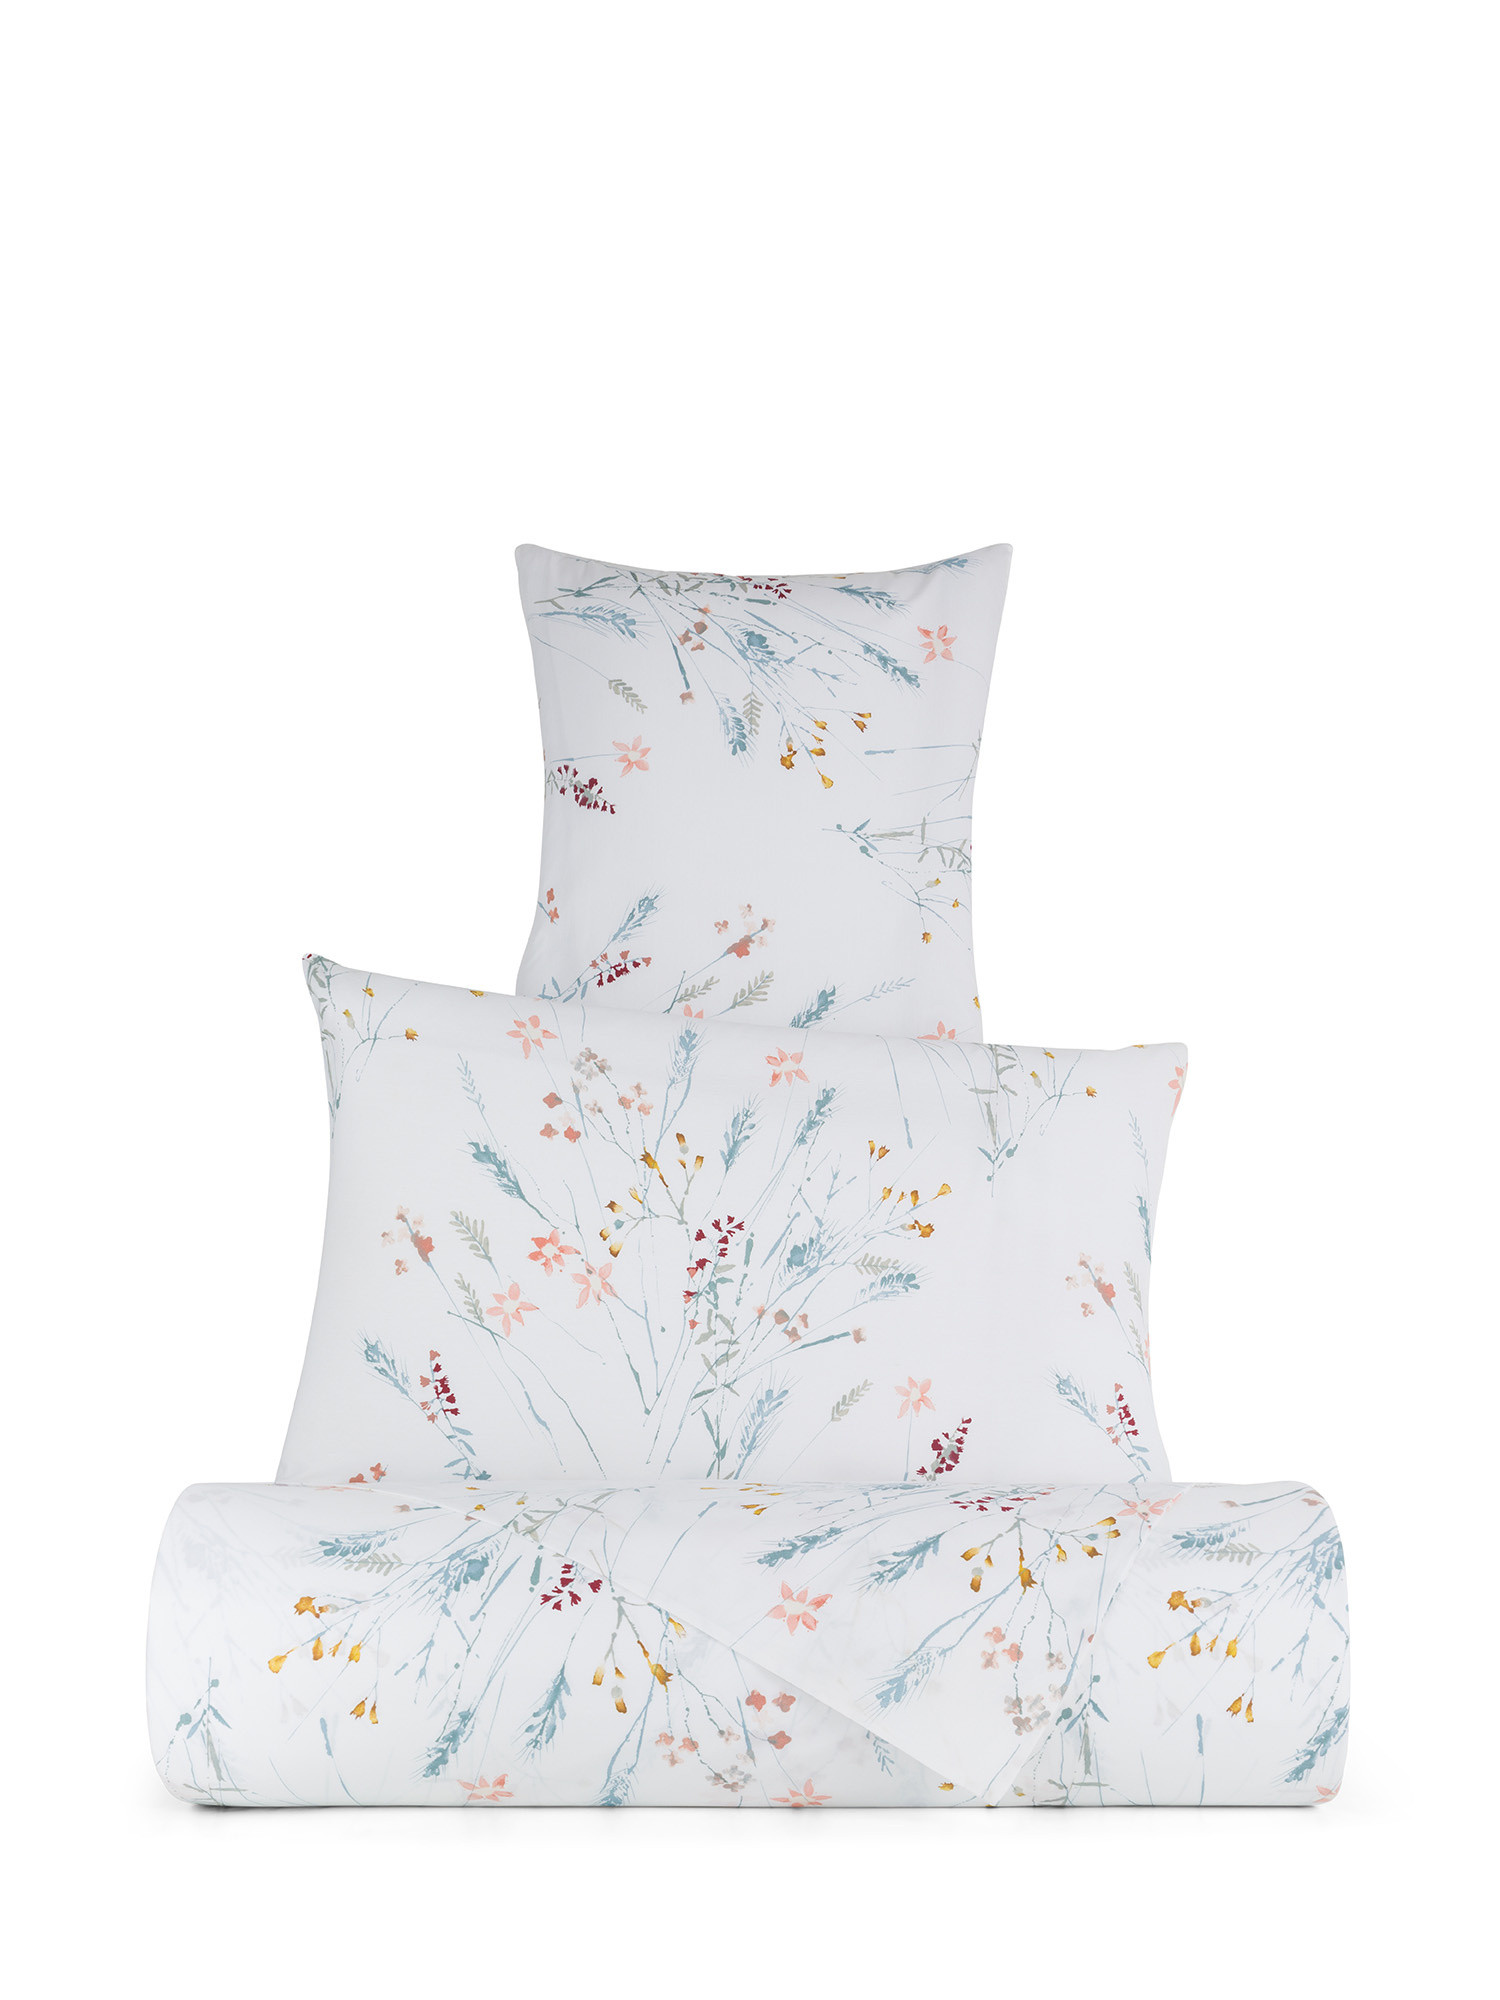 Cotton percale duvet cover set with floral pattern, White, large image number 0